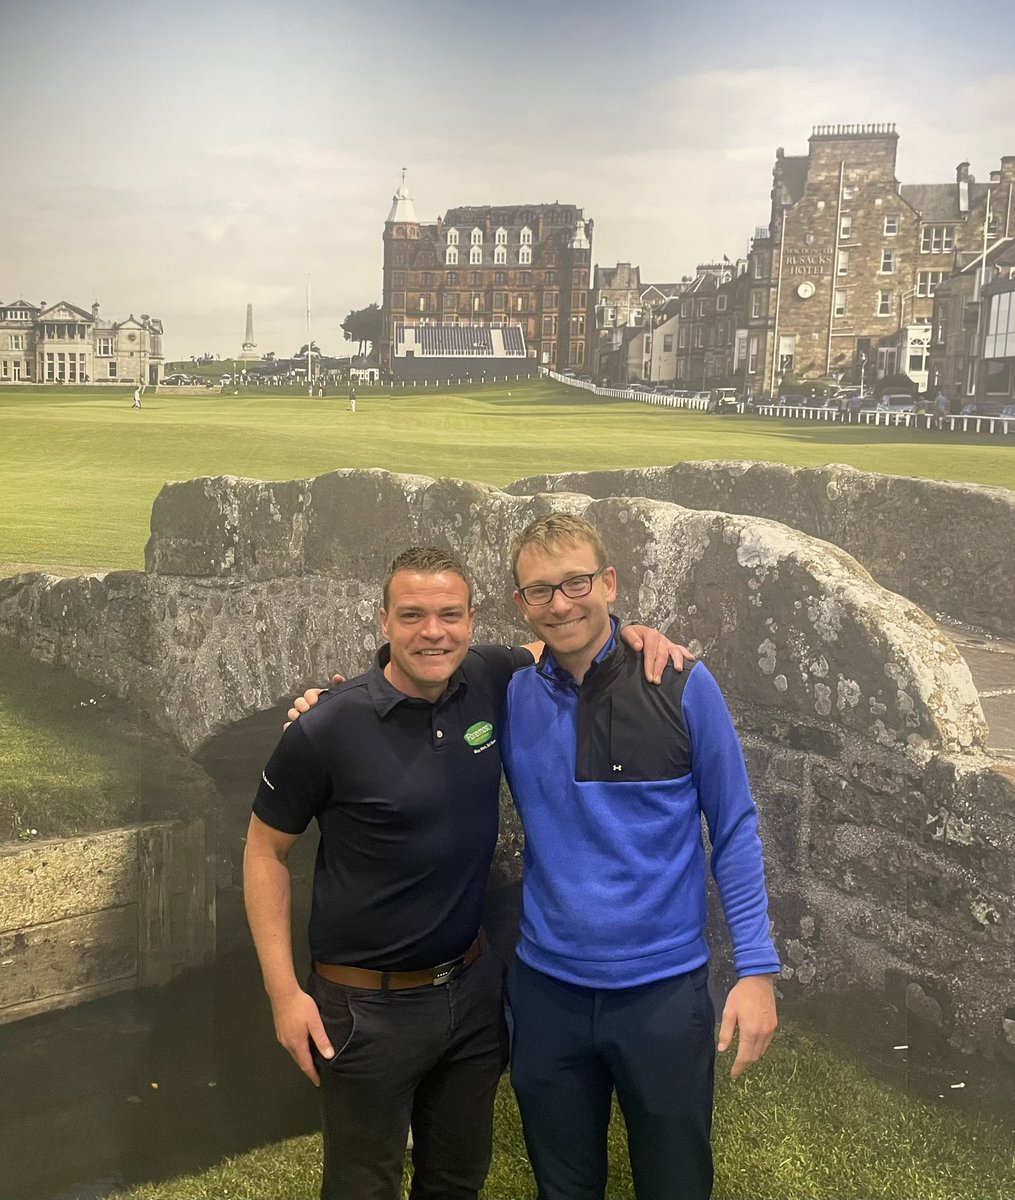 Today, I got to say goodbye and good luck to @BRGolf26 He has always given his business and @ForemostGolf everything. Delighted his career continues to grow with an excellent opportunity @TaylorMadeGolf Go get it Pro #topman #newventures #foremostgolf #taylormadegolf